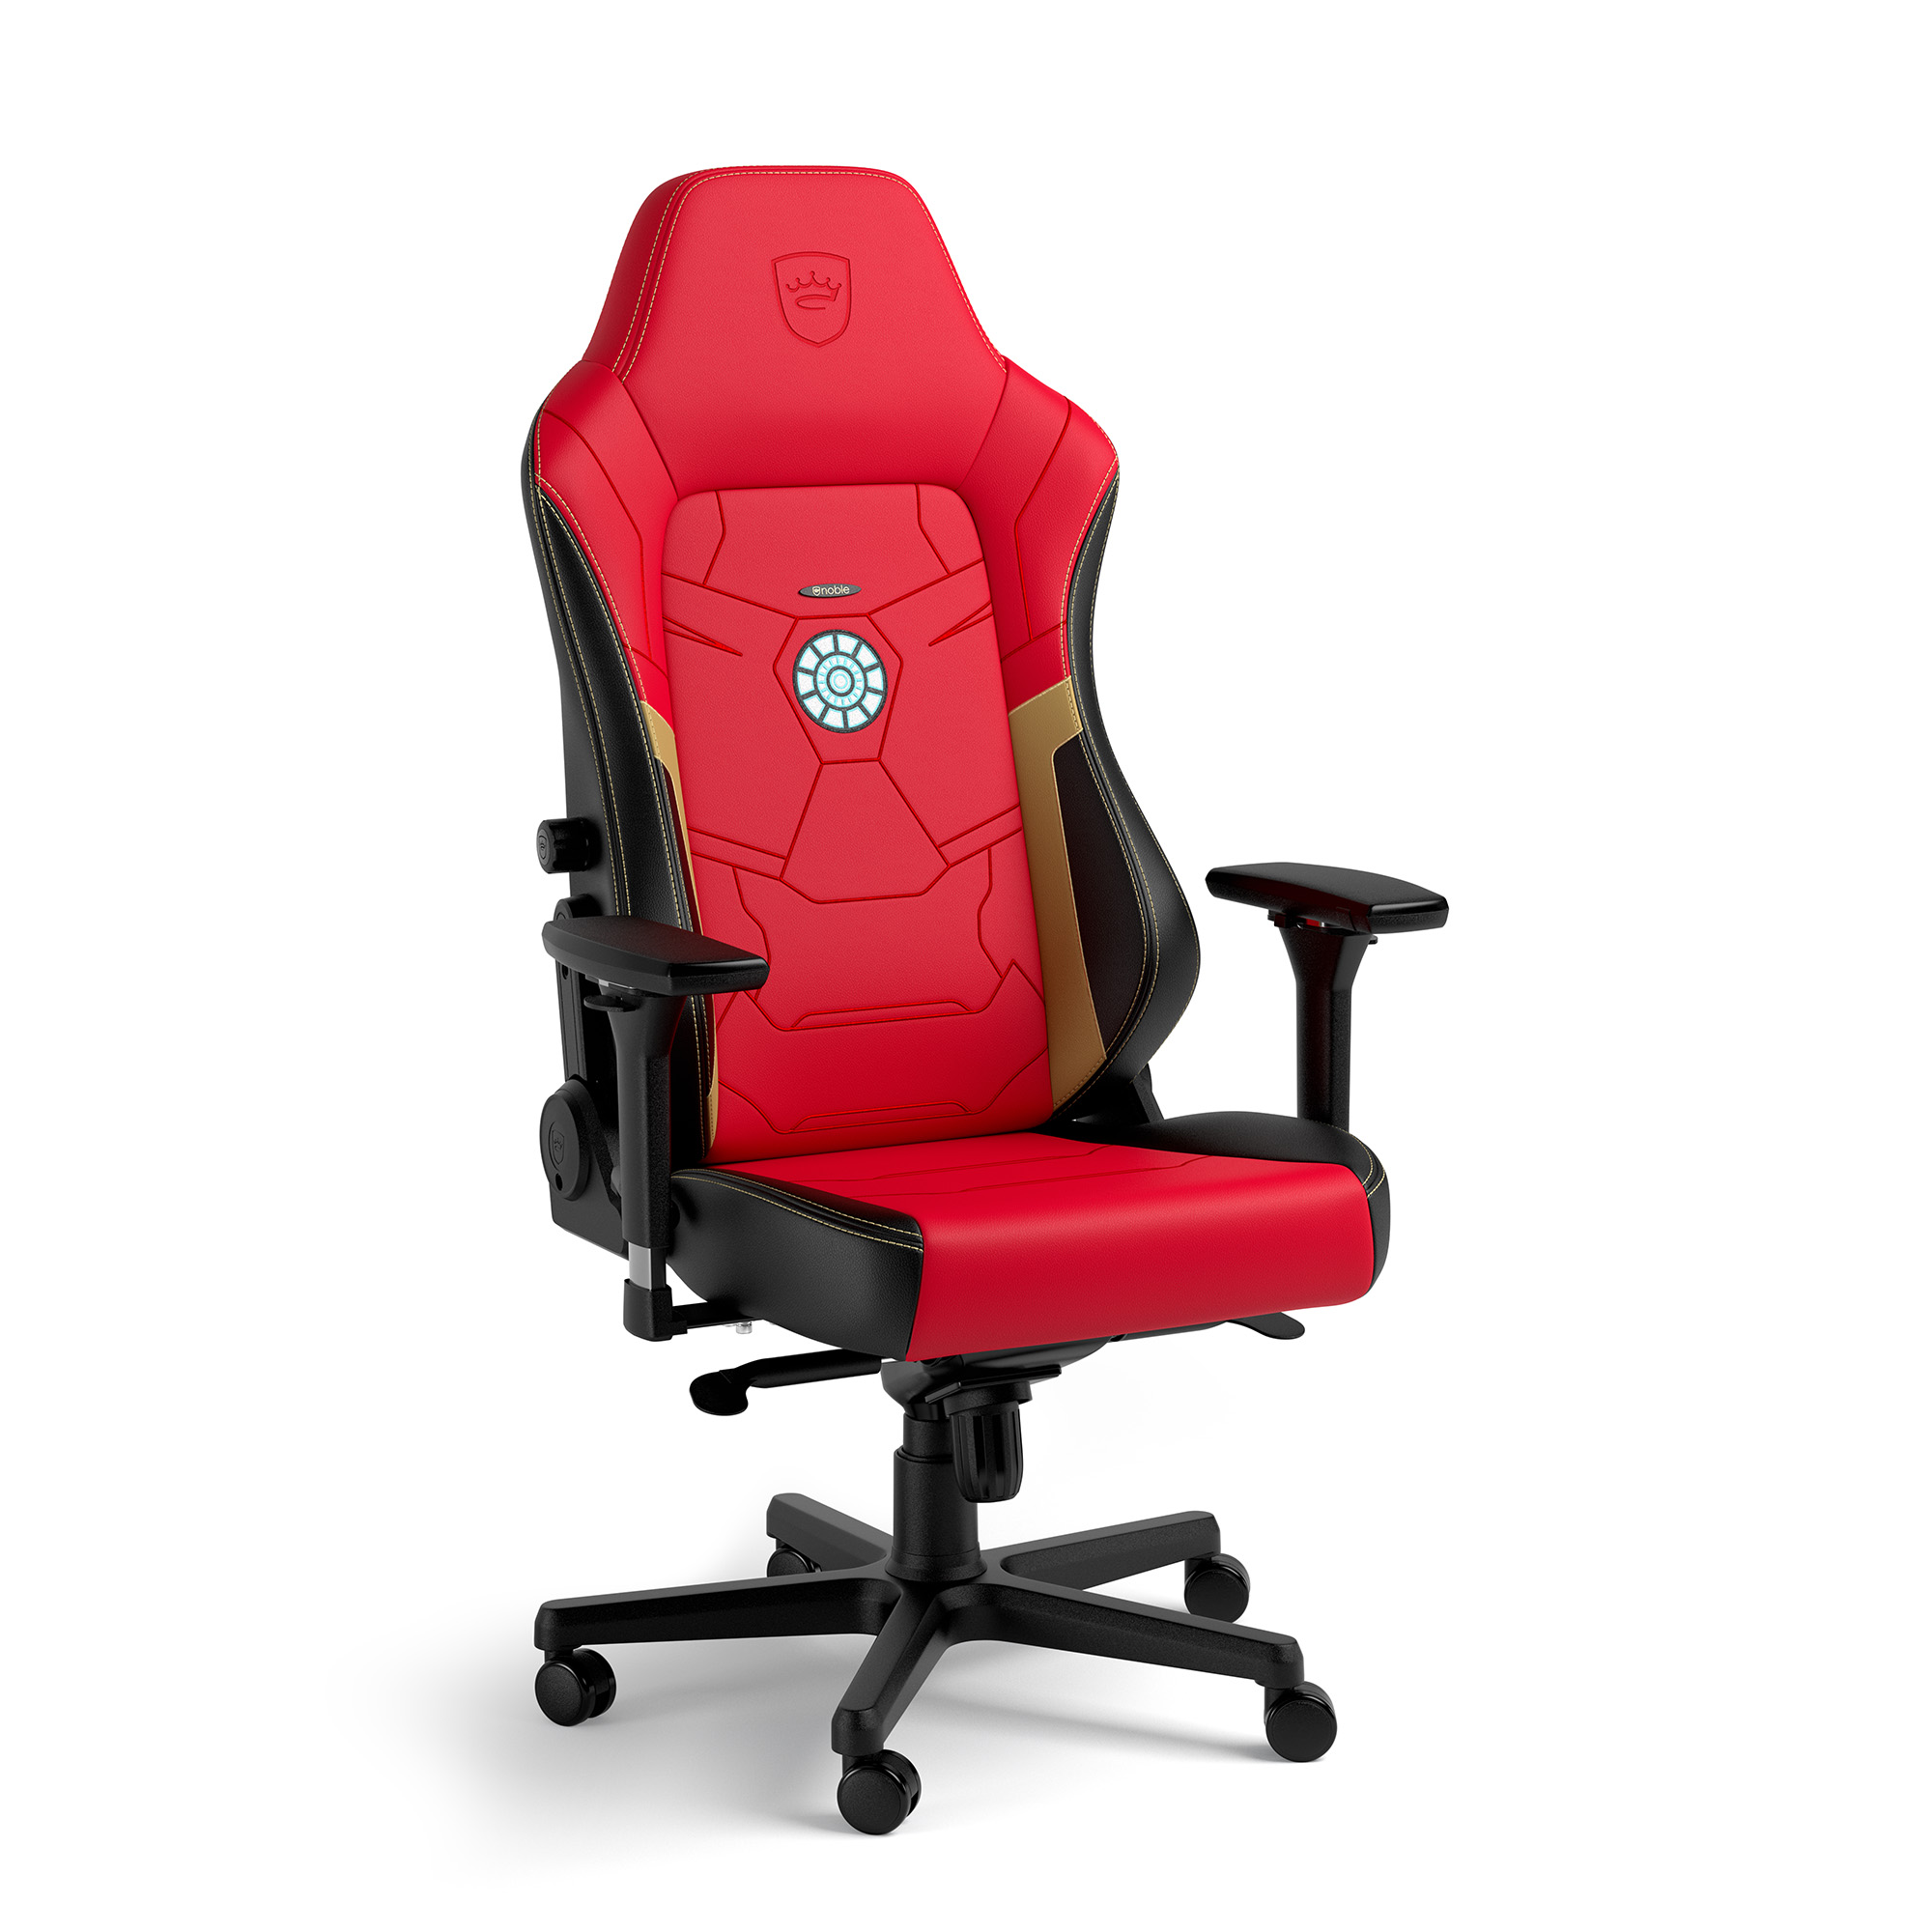 noblechairs - noblechairs HERO Gaming Chair - Iron Man Edition